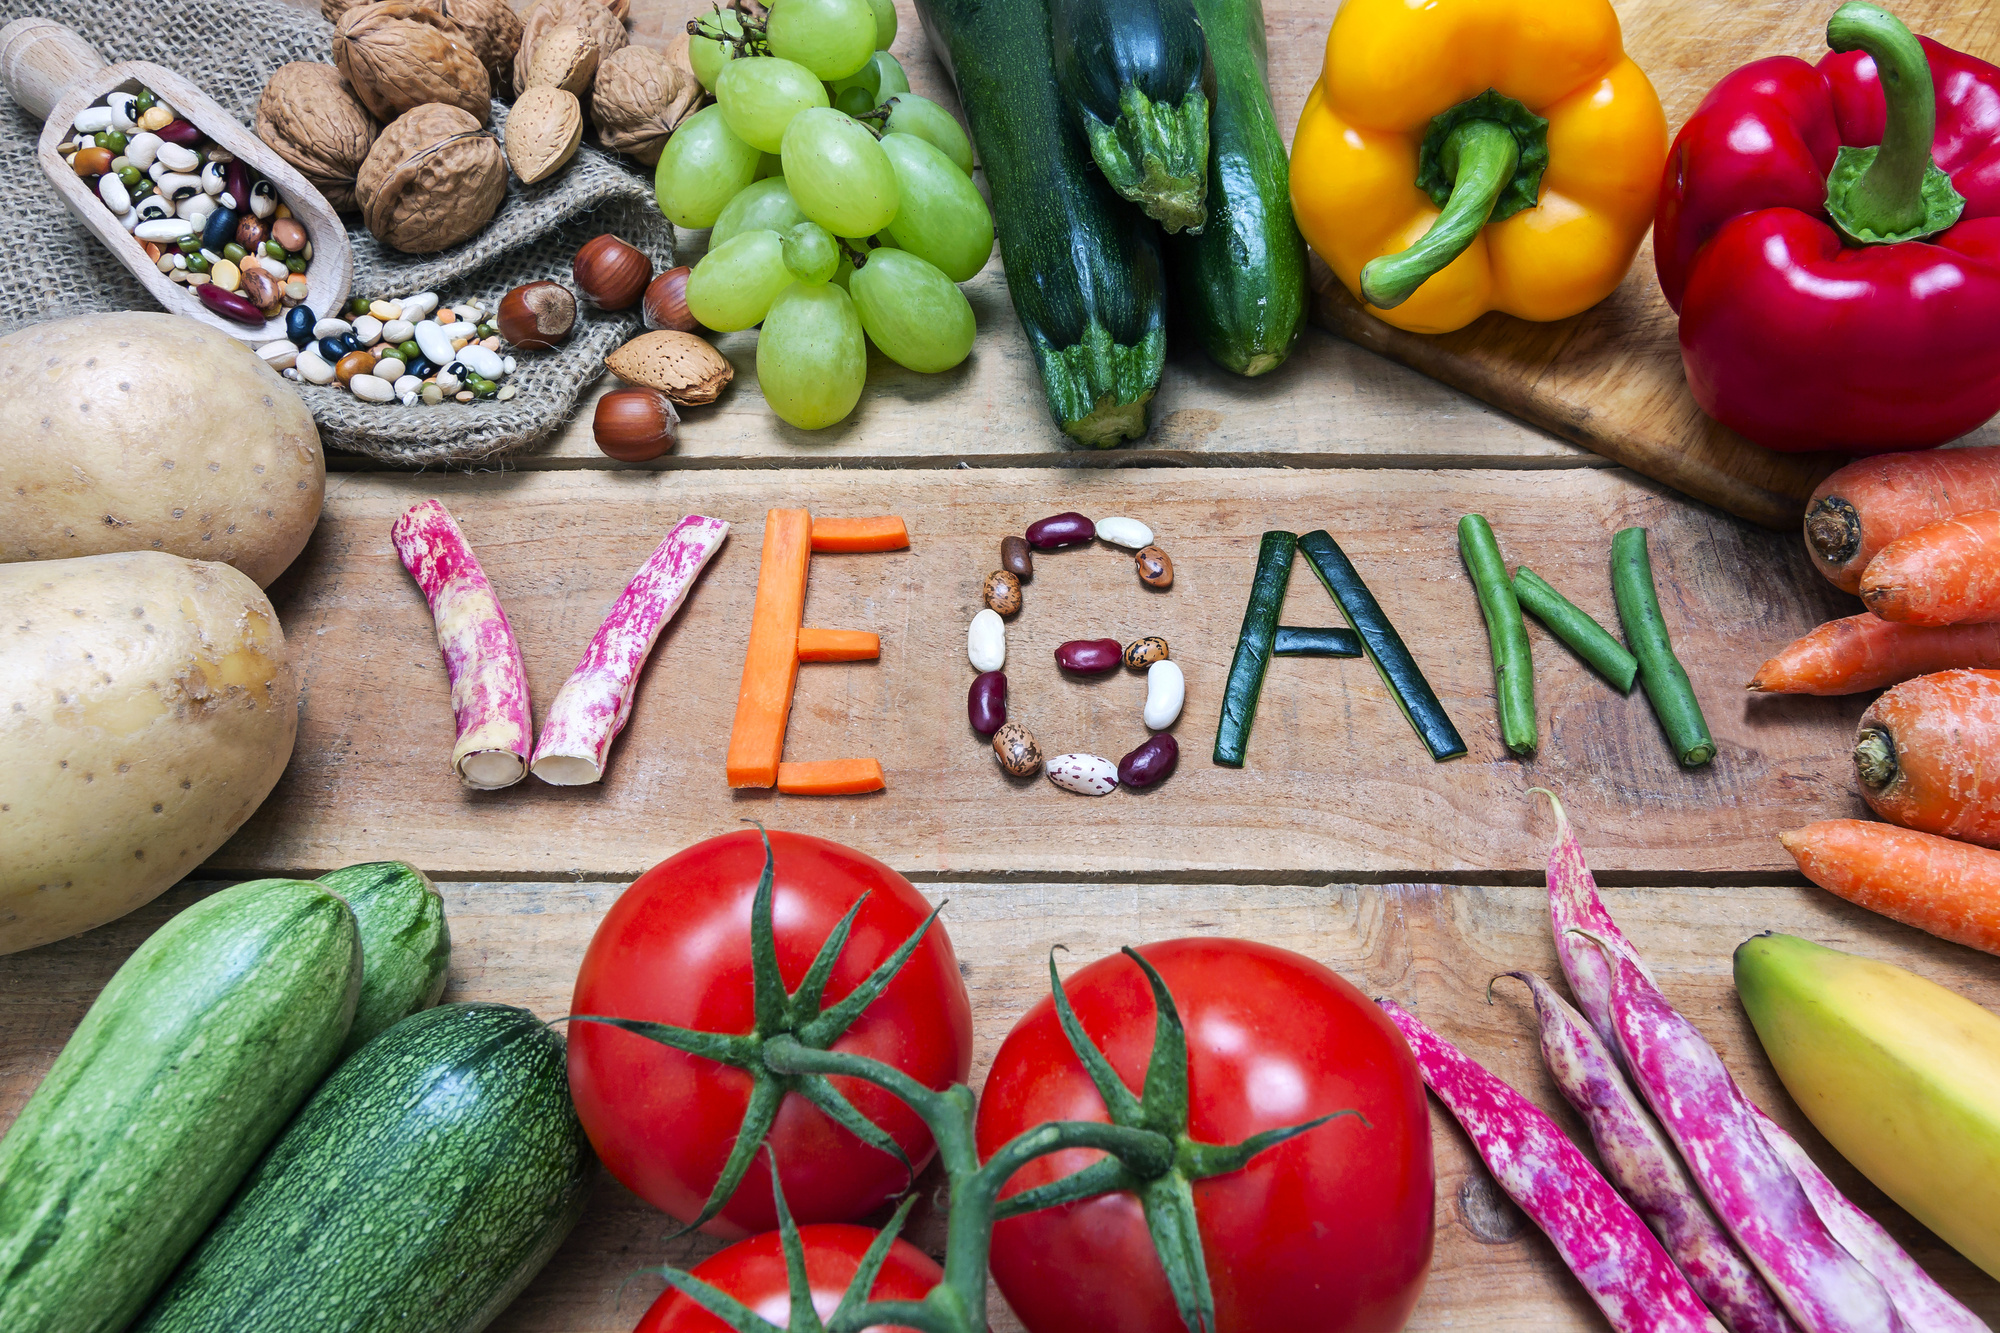 3 Tips for Going Vegan (And Sticking With It)